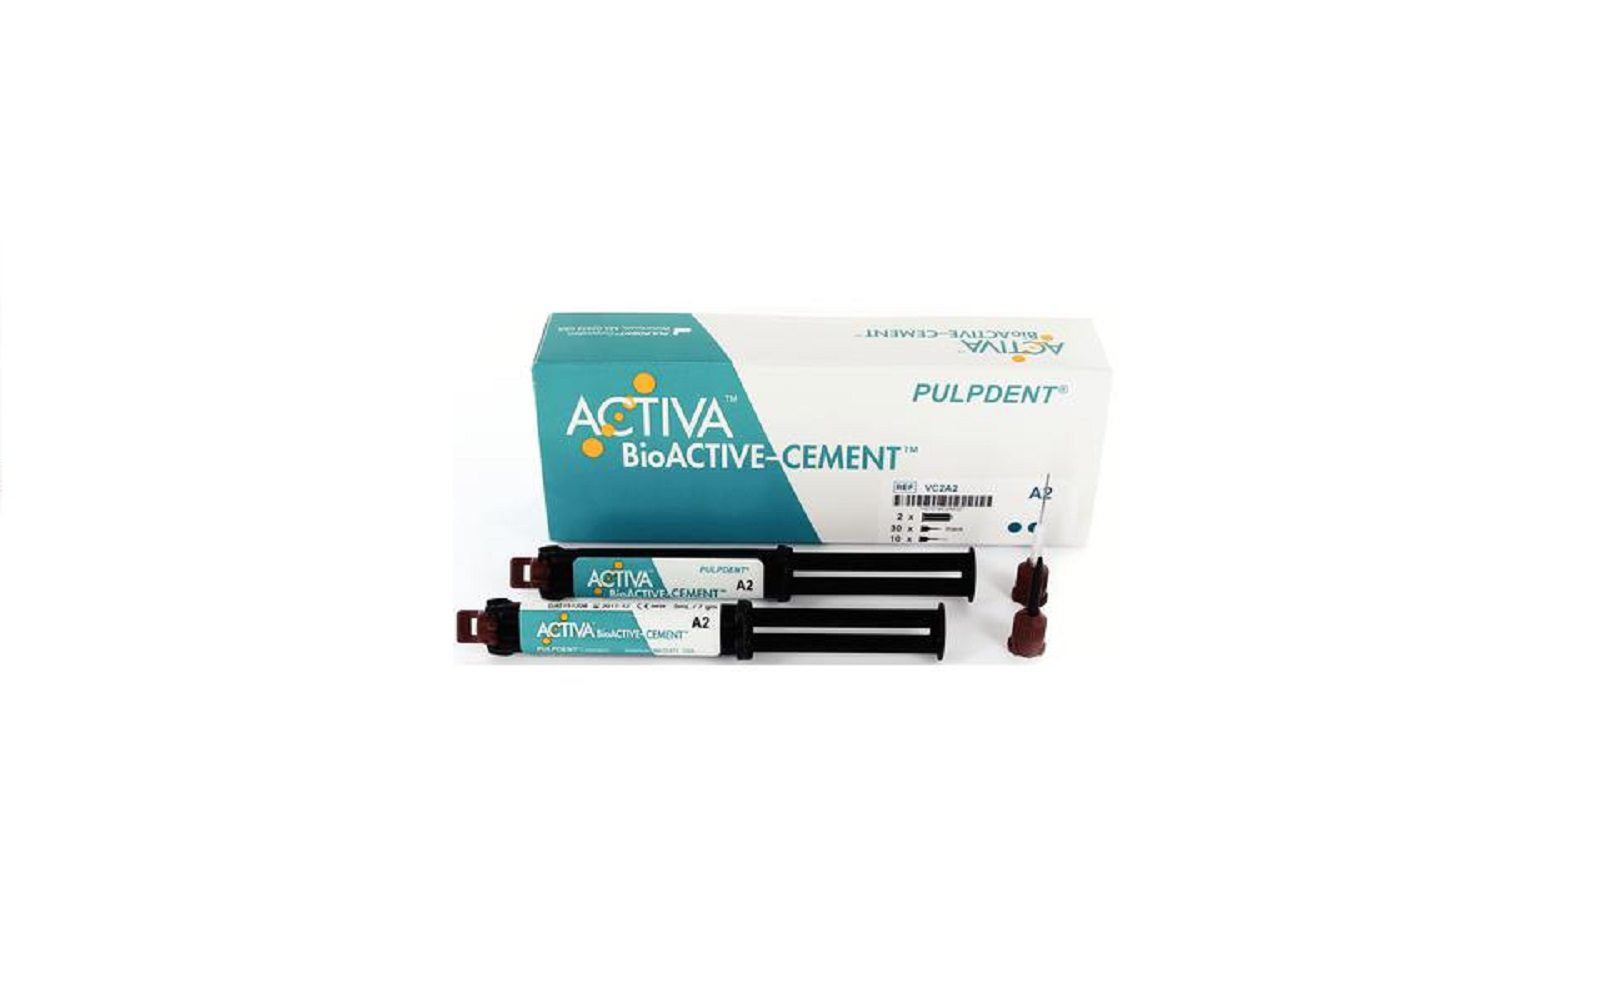 Activa™ bioactive cement, value pack - pulpdent corp of america